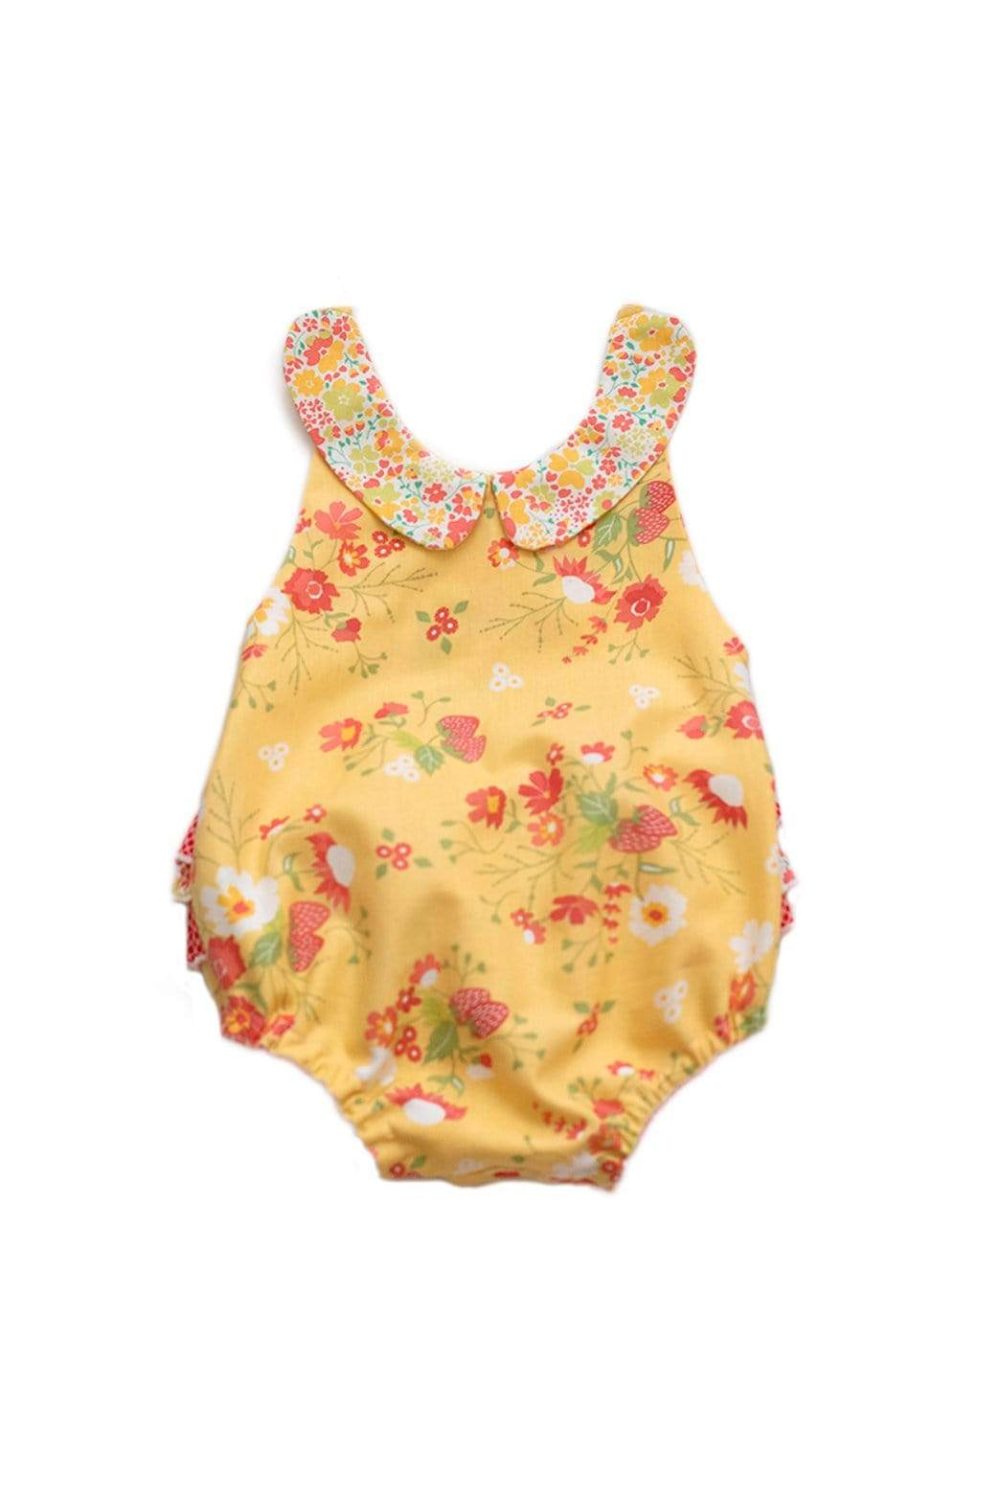 Sunny Strawberry Baby Bubble/Romper - Kinder Kouture